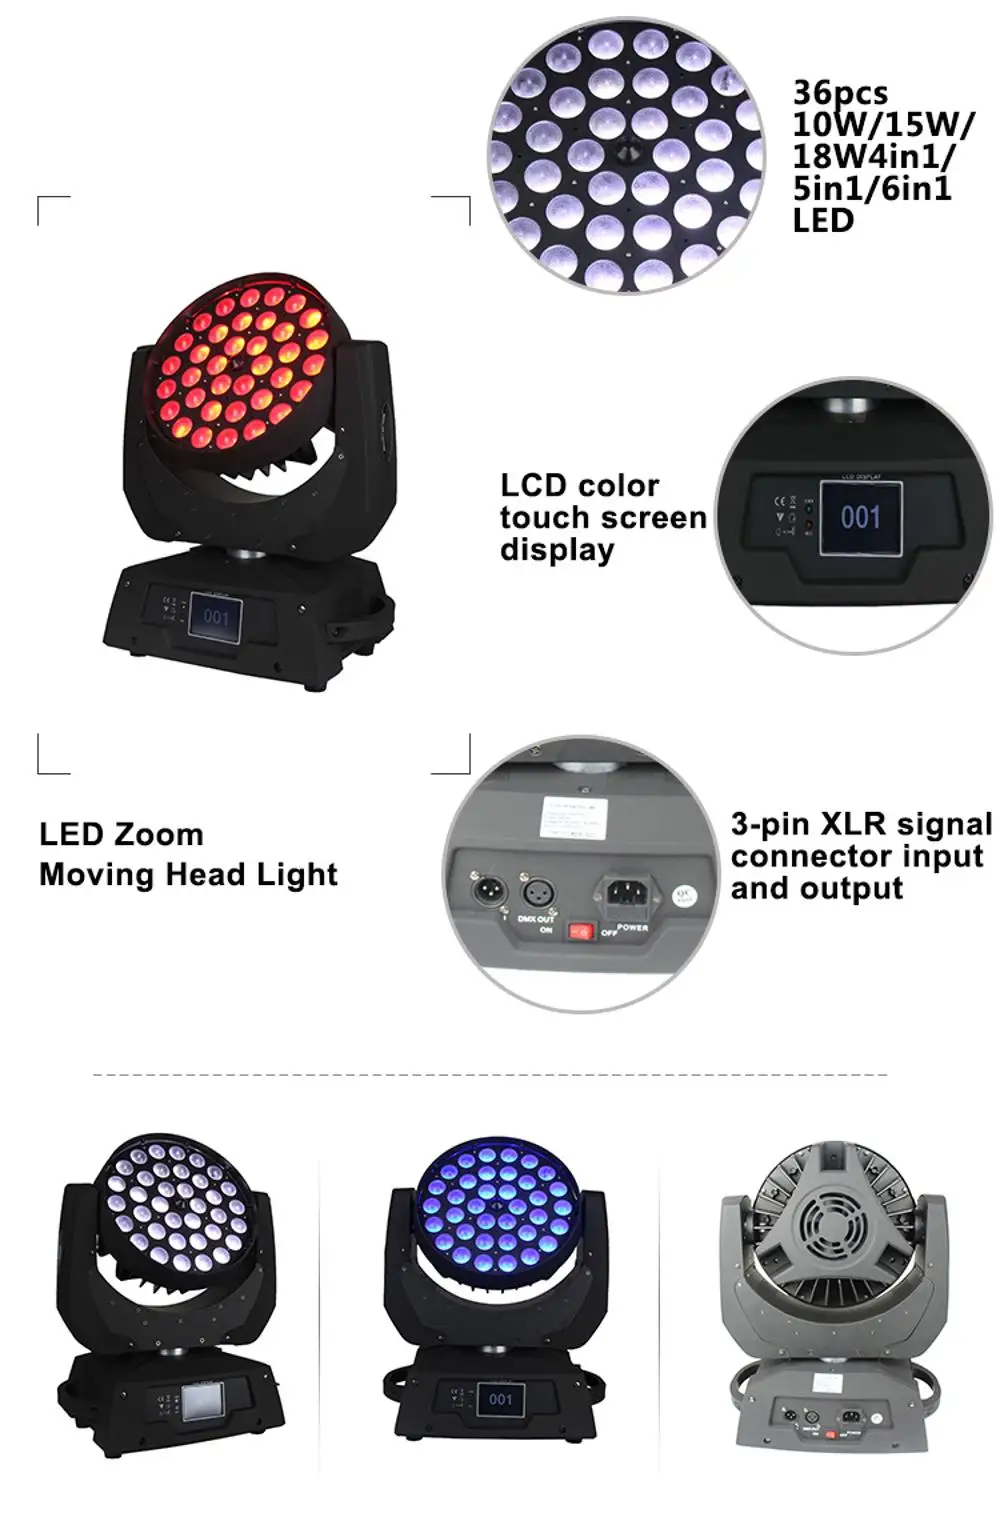 6In1 LED Moving Head Light